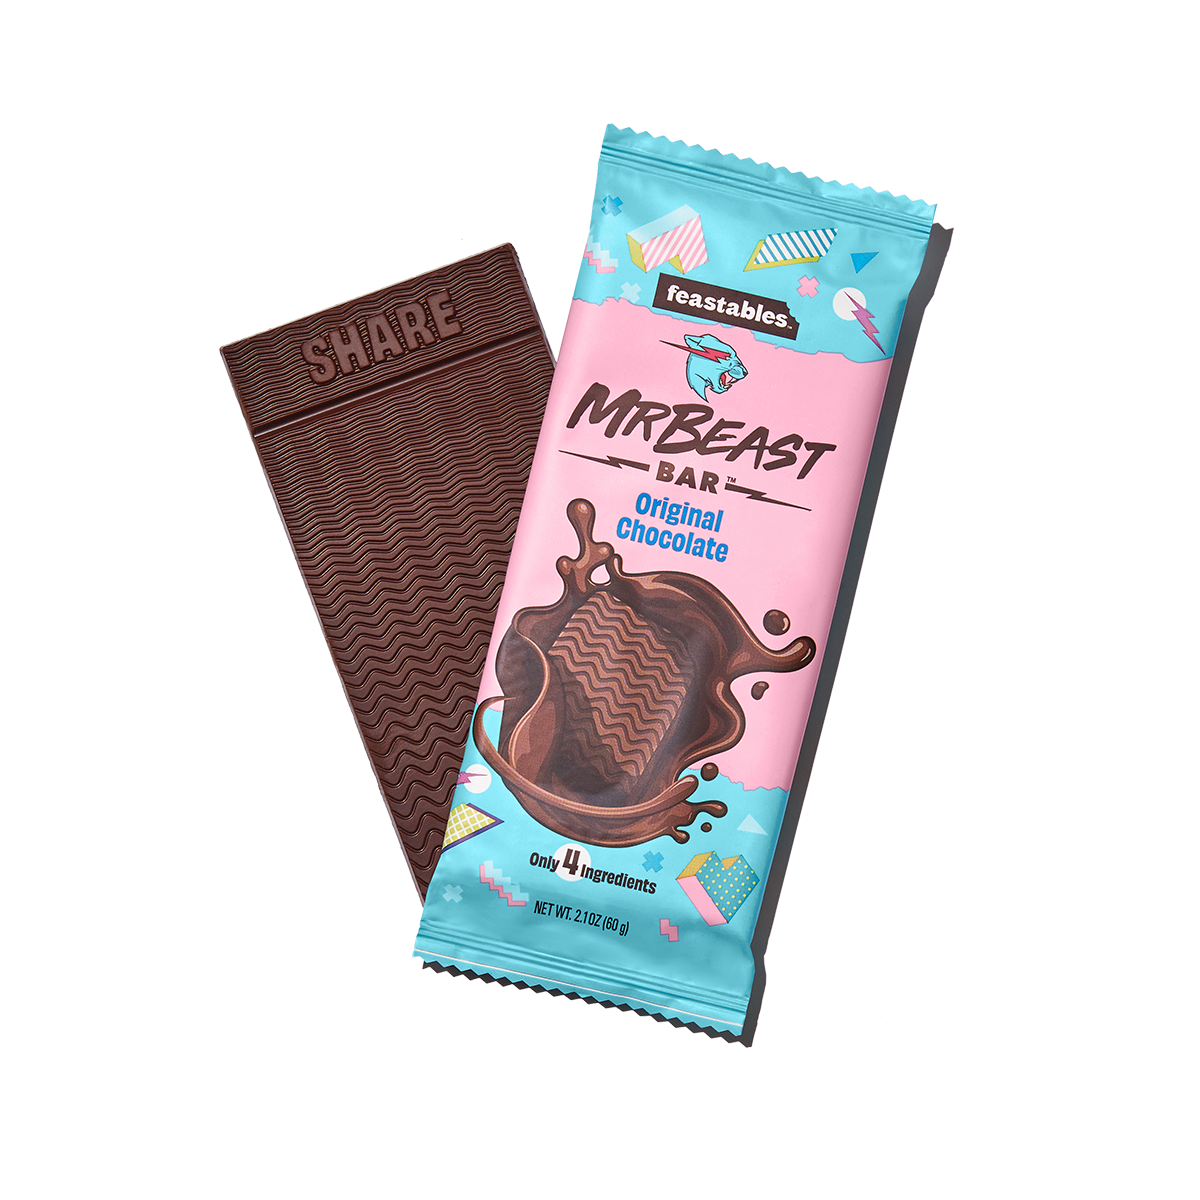 Feastables MrBeast Original Chocolate Bars - Made with Organic Cocoa. Plant  Based with Only 4 Ingredients, 10 Count